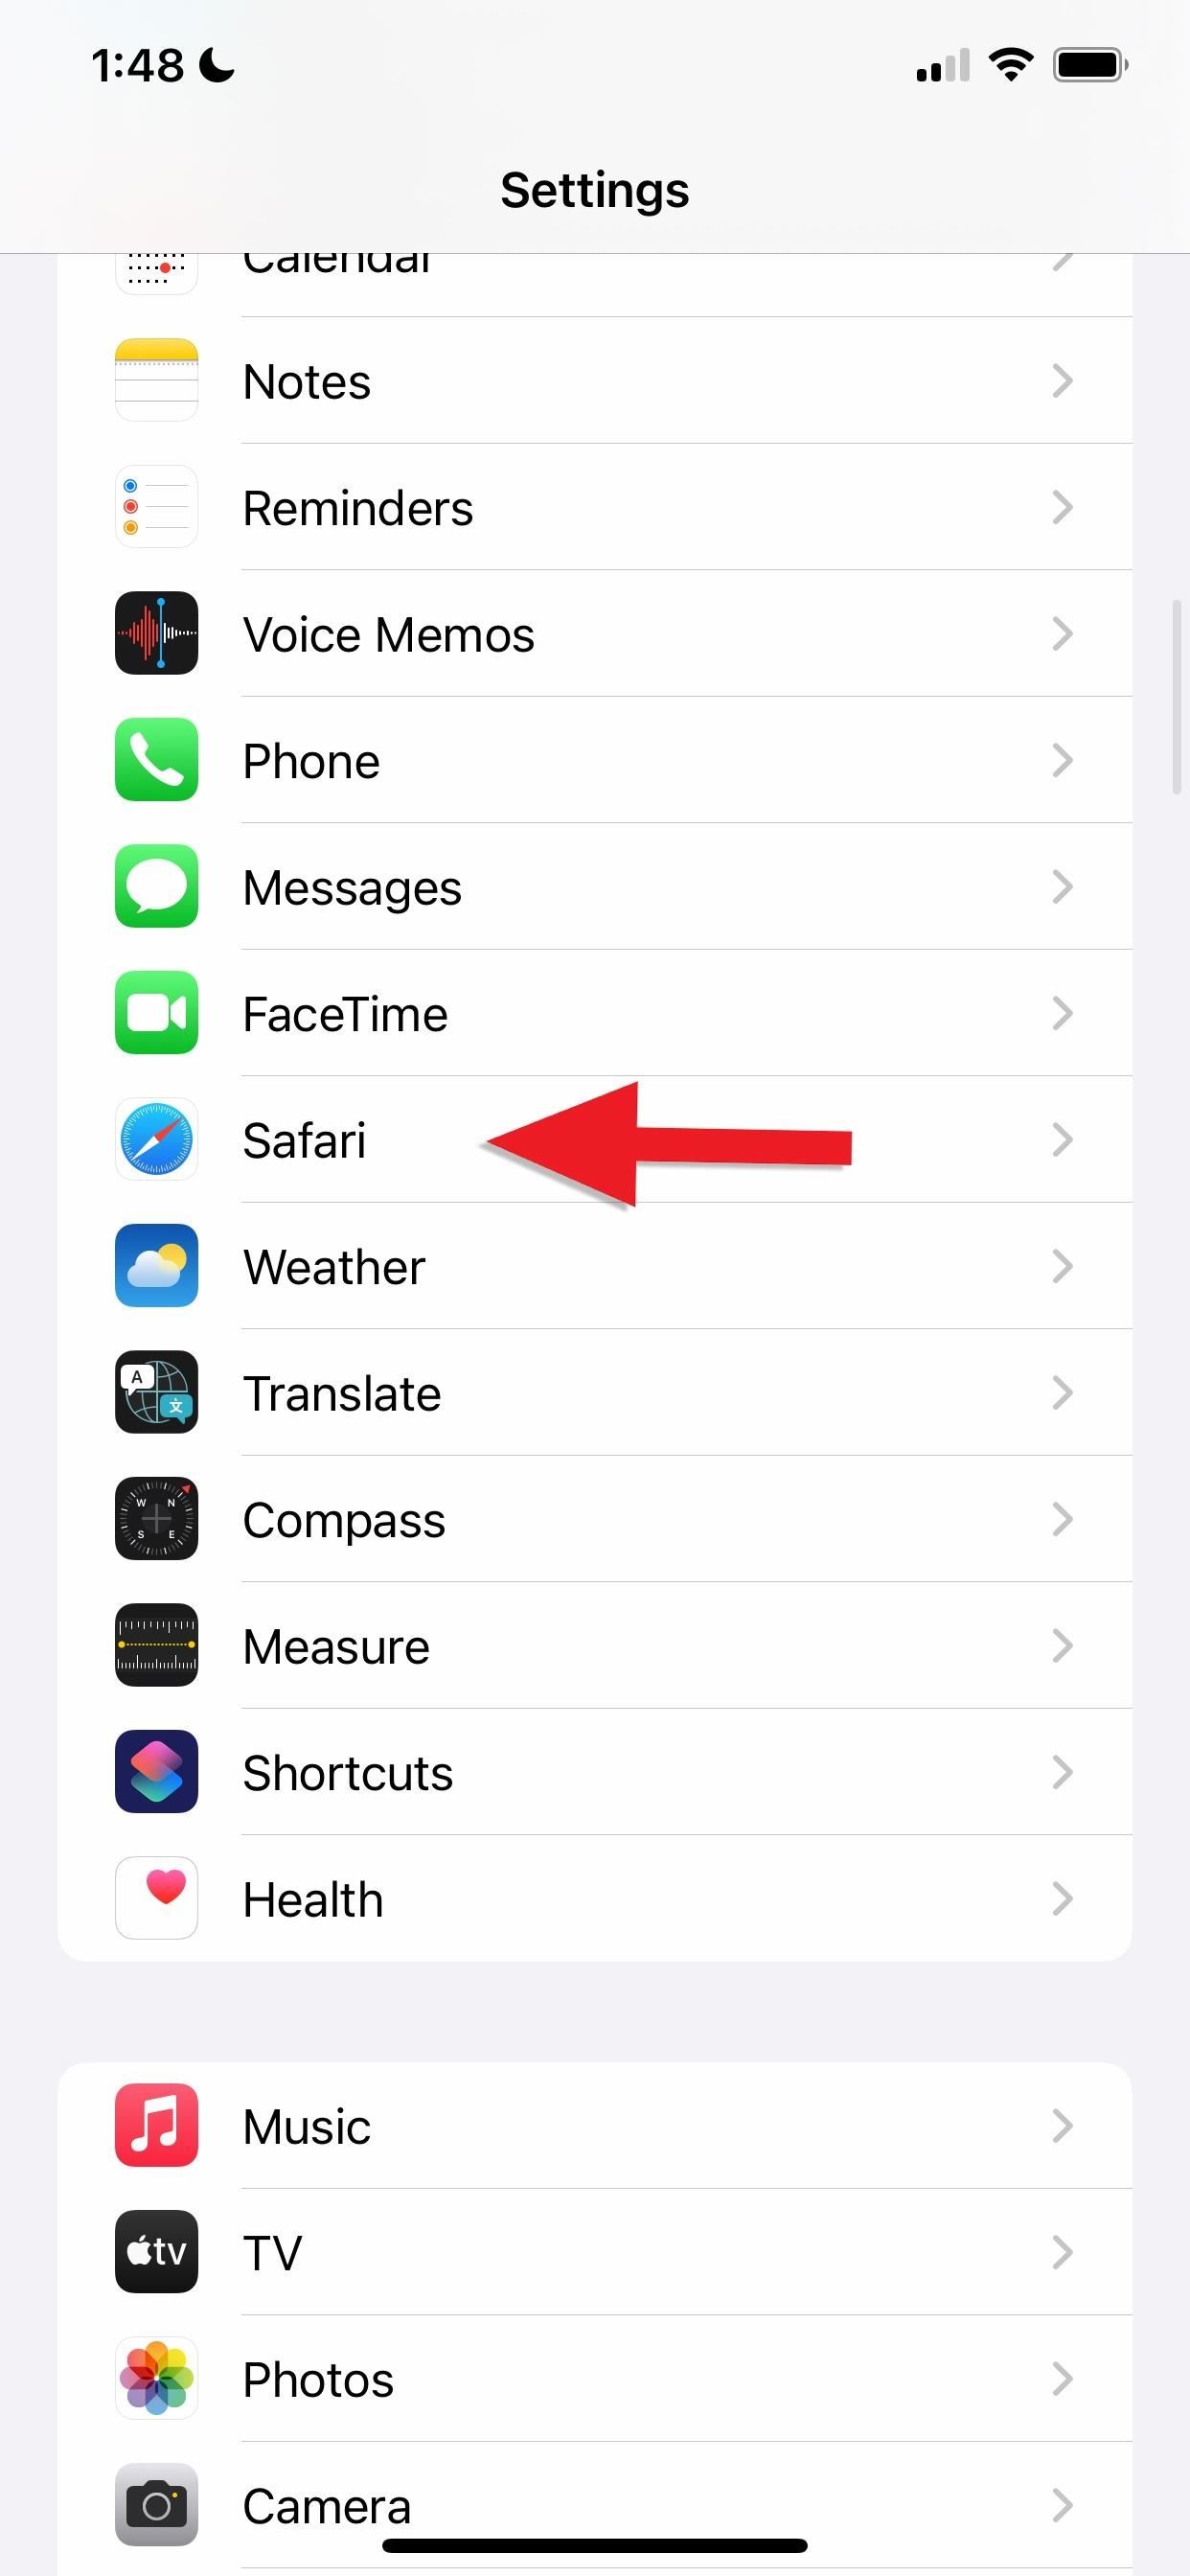 Make Your iPhone Automatically Close Old Tabs So Safari Doesn't Become a Hot Mess